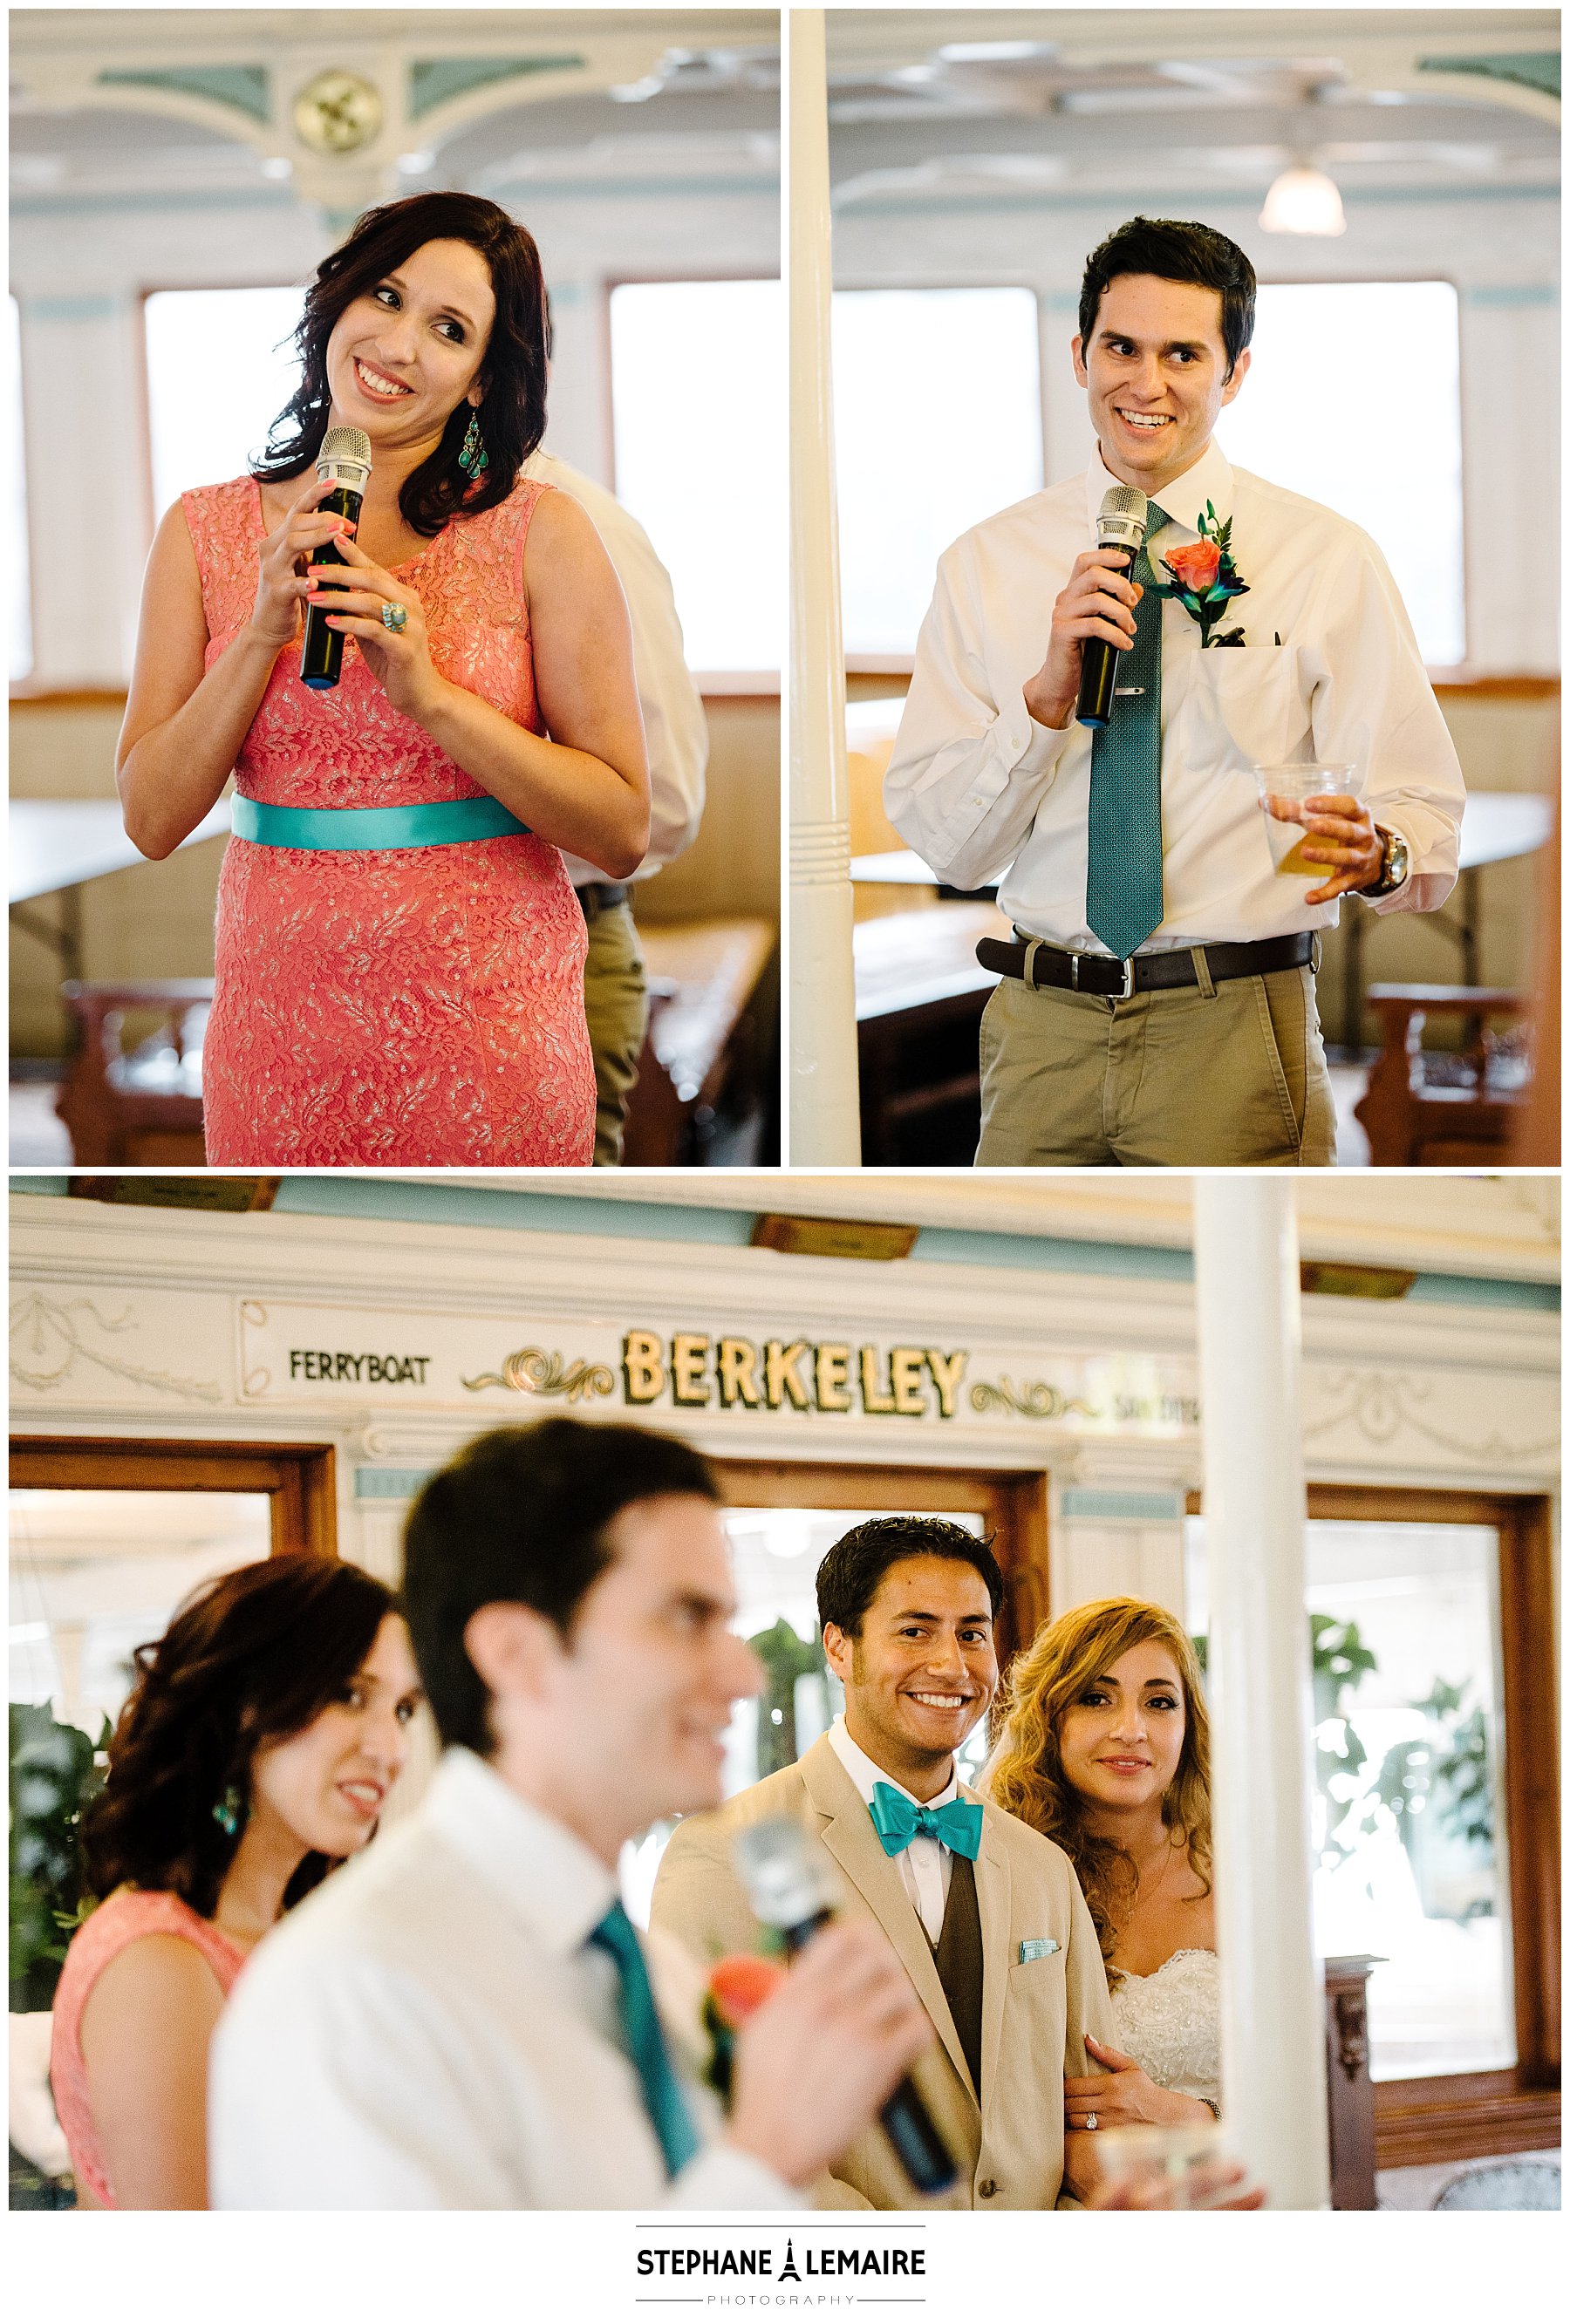 San Diego Wedding Session-Reception at Maritime Museum- Toasts from Best Man and Maid of Honor